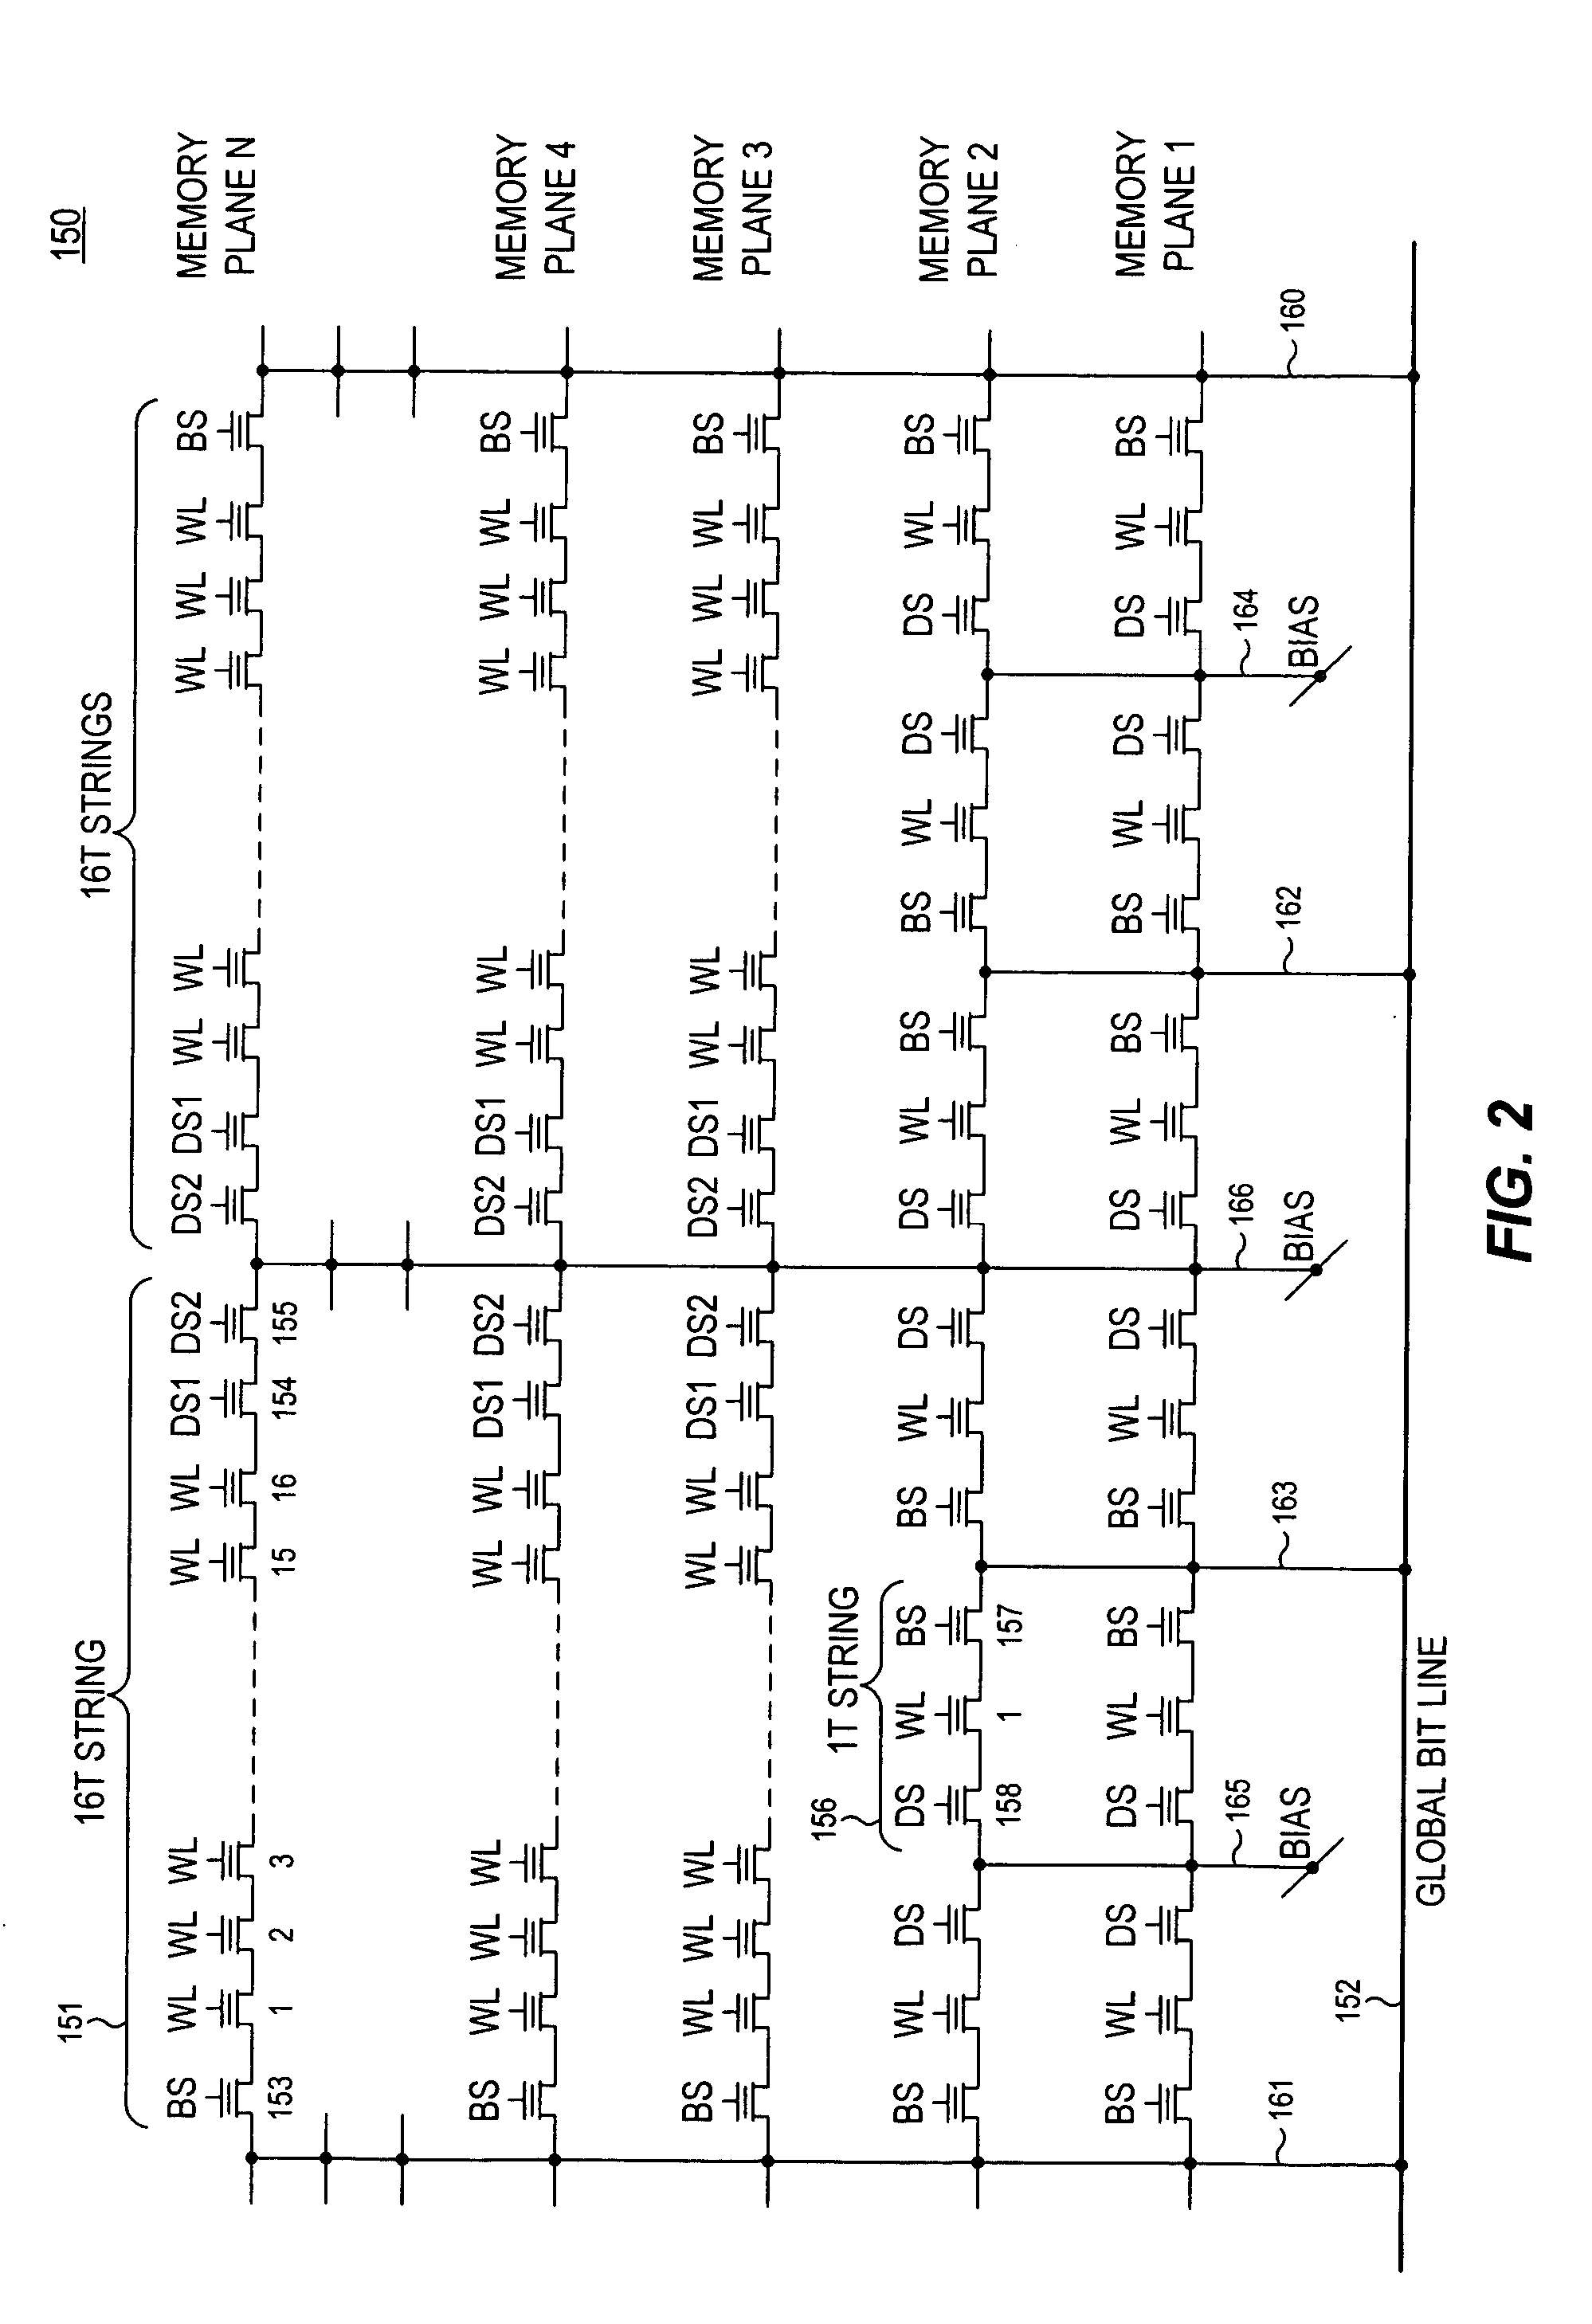 Integrated circuit including memory array incorporating multiple types of NAND string structures